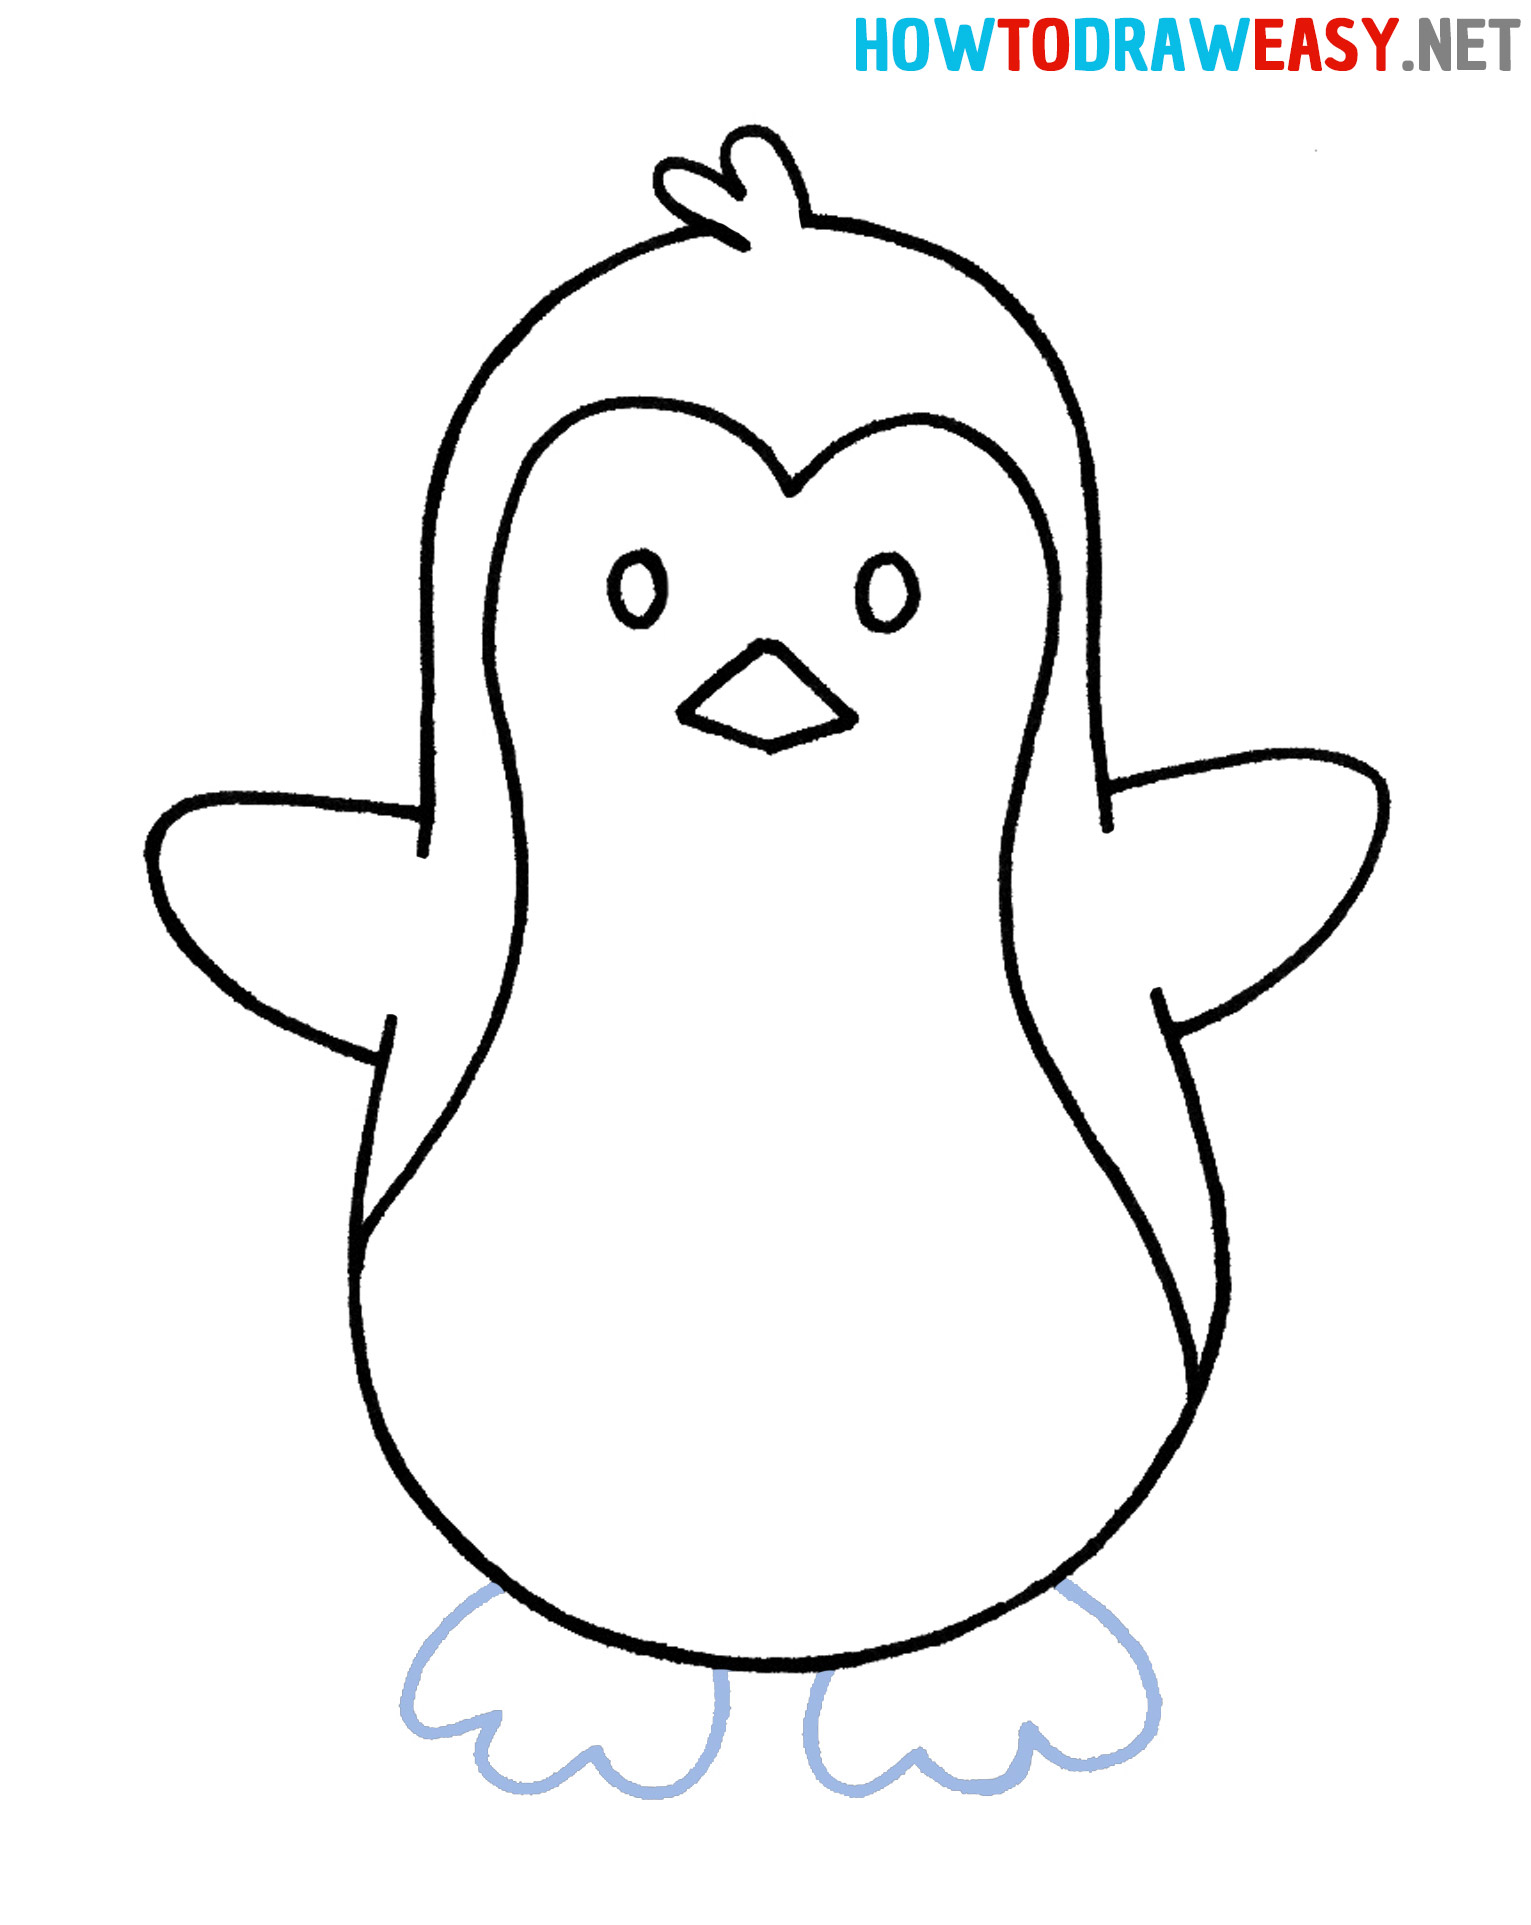 Penguin How to Draw